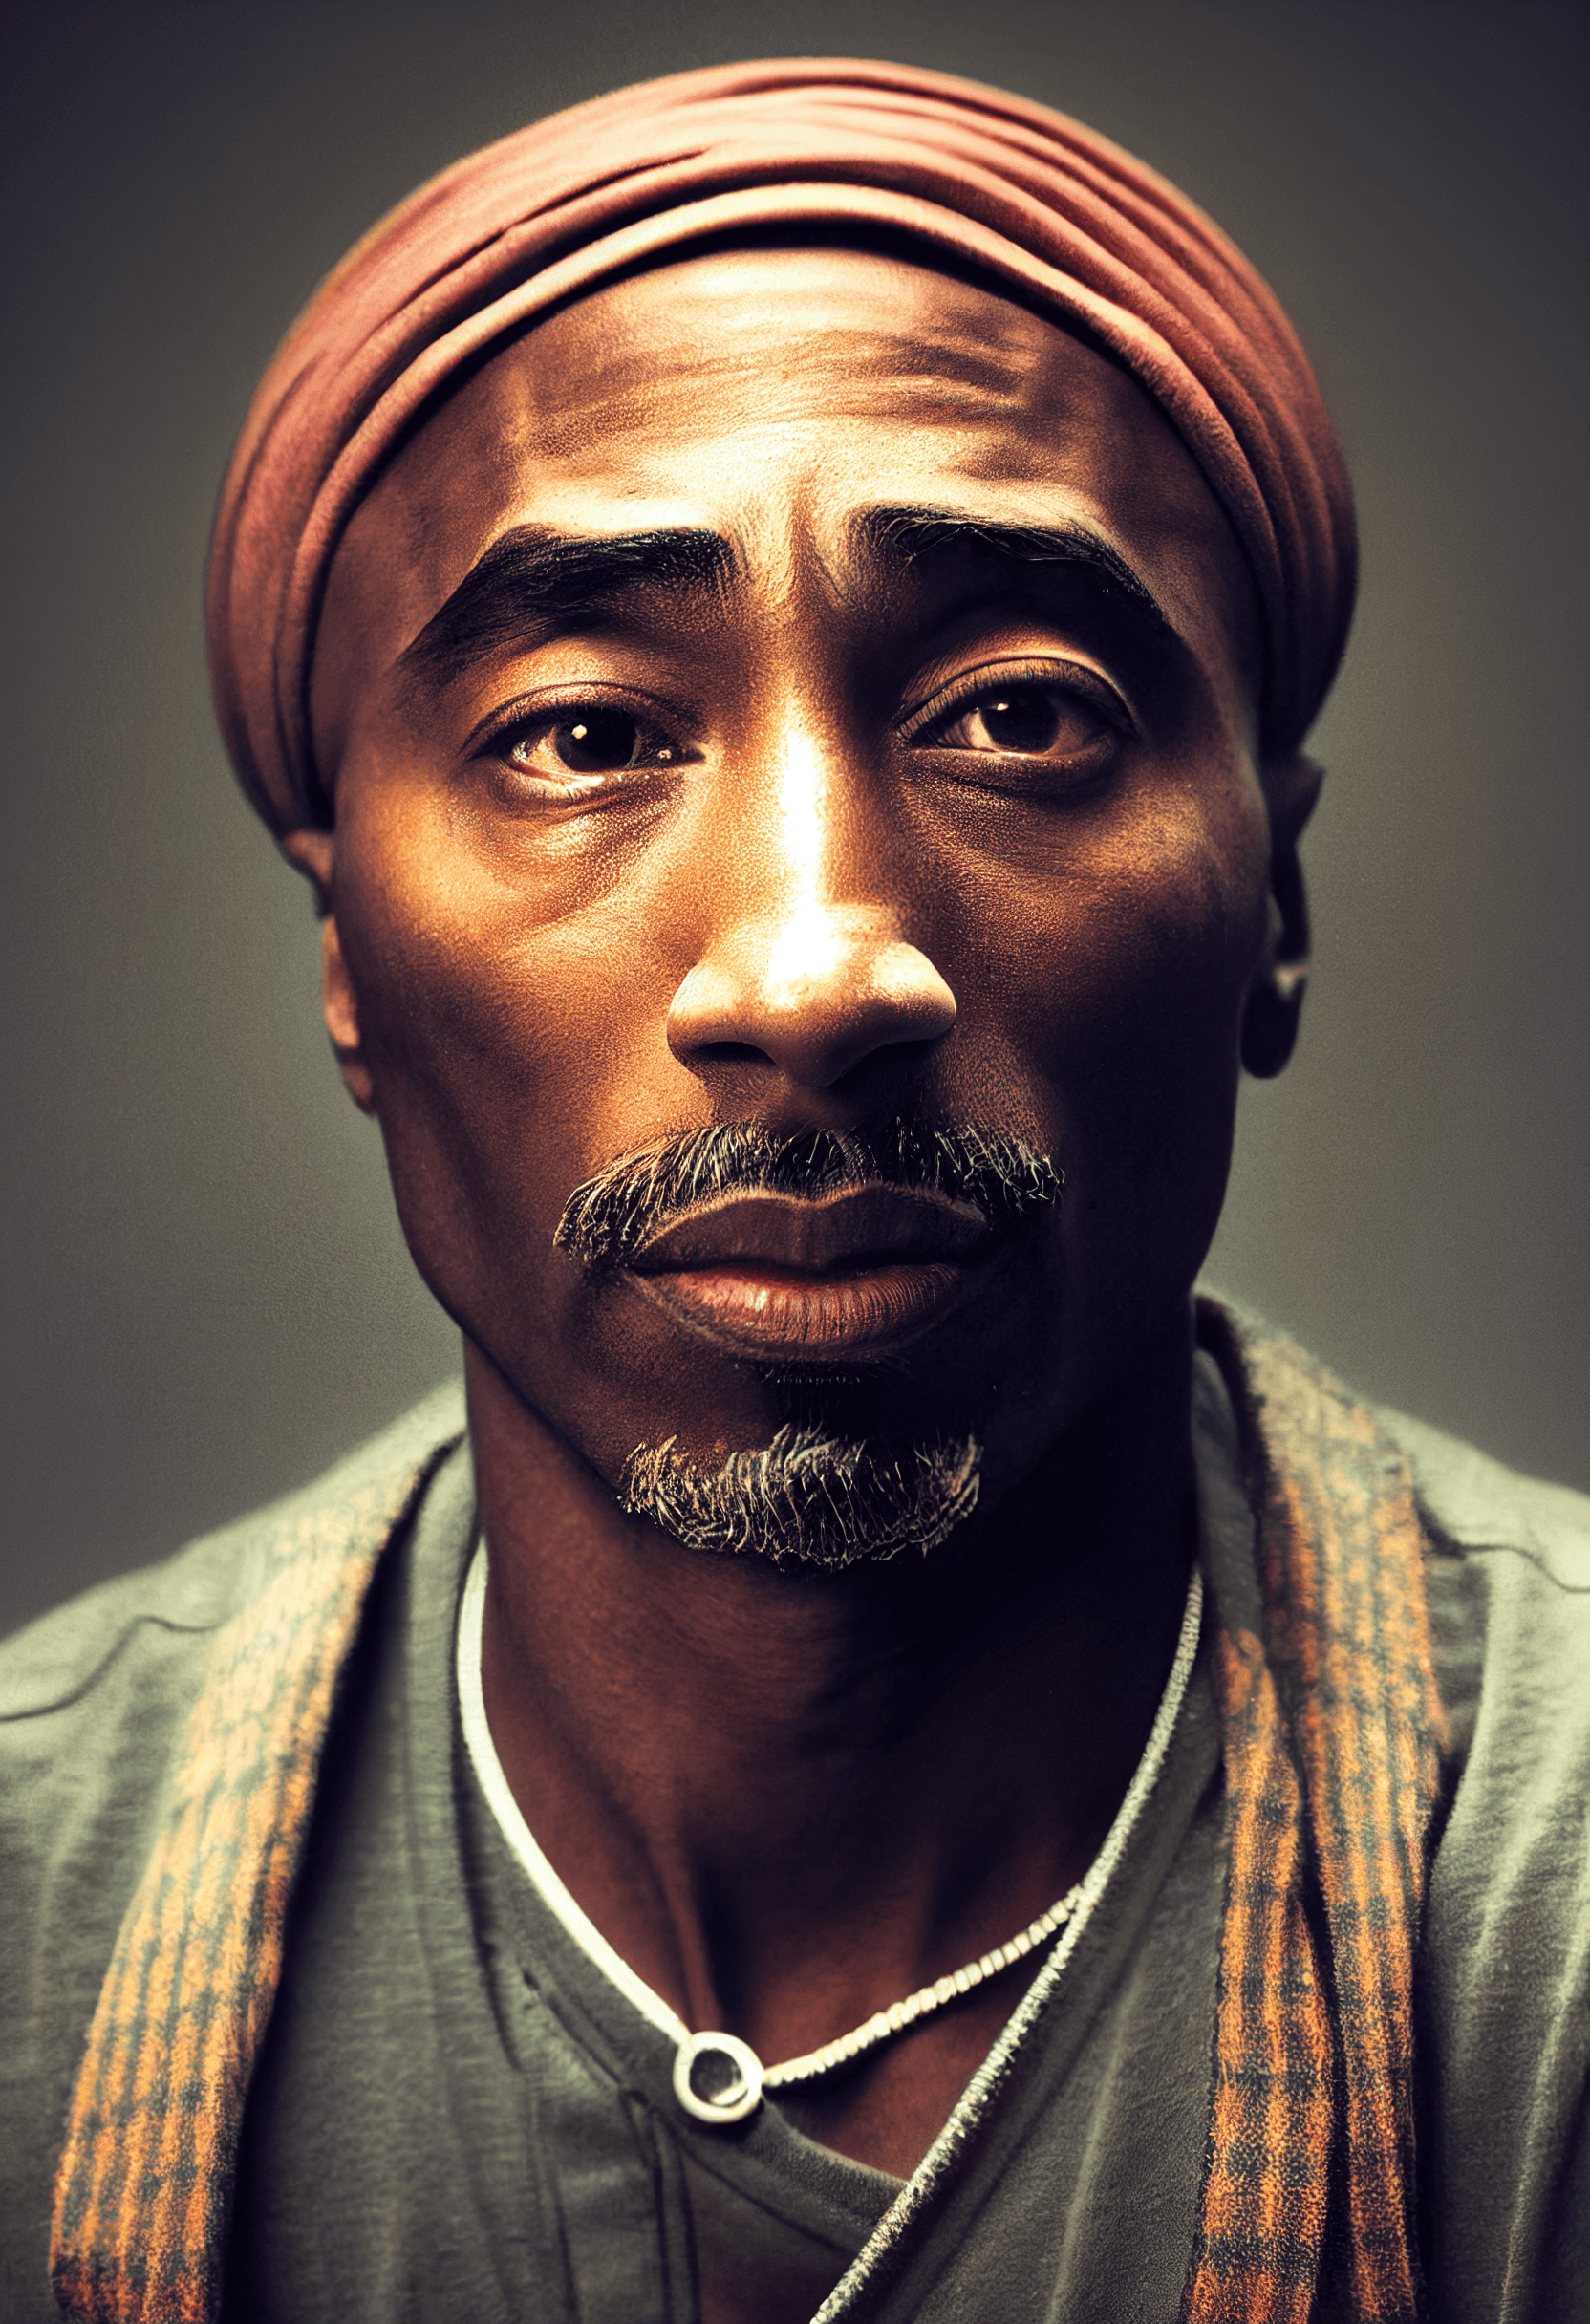 The Old Tupac